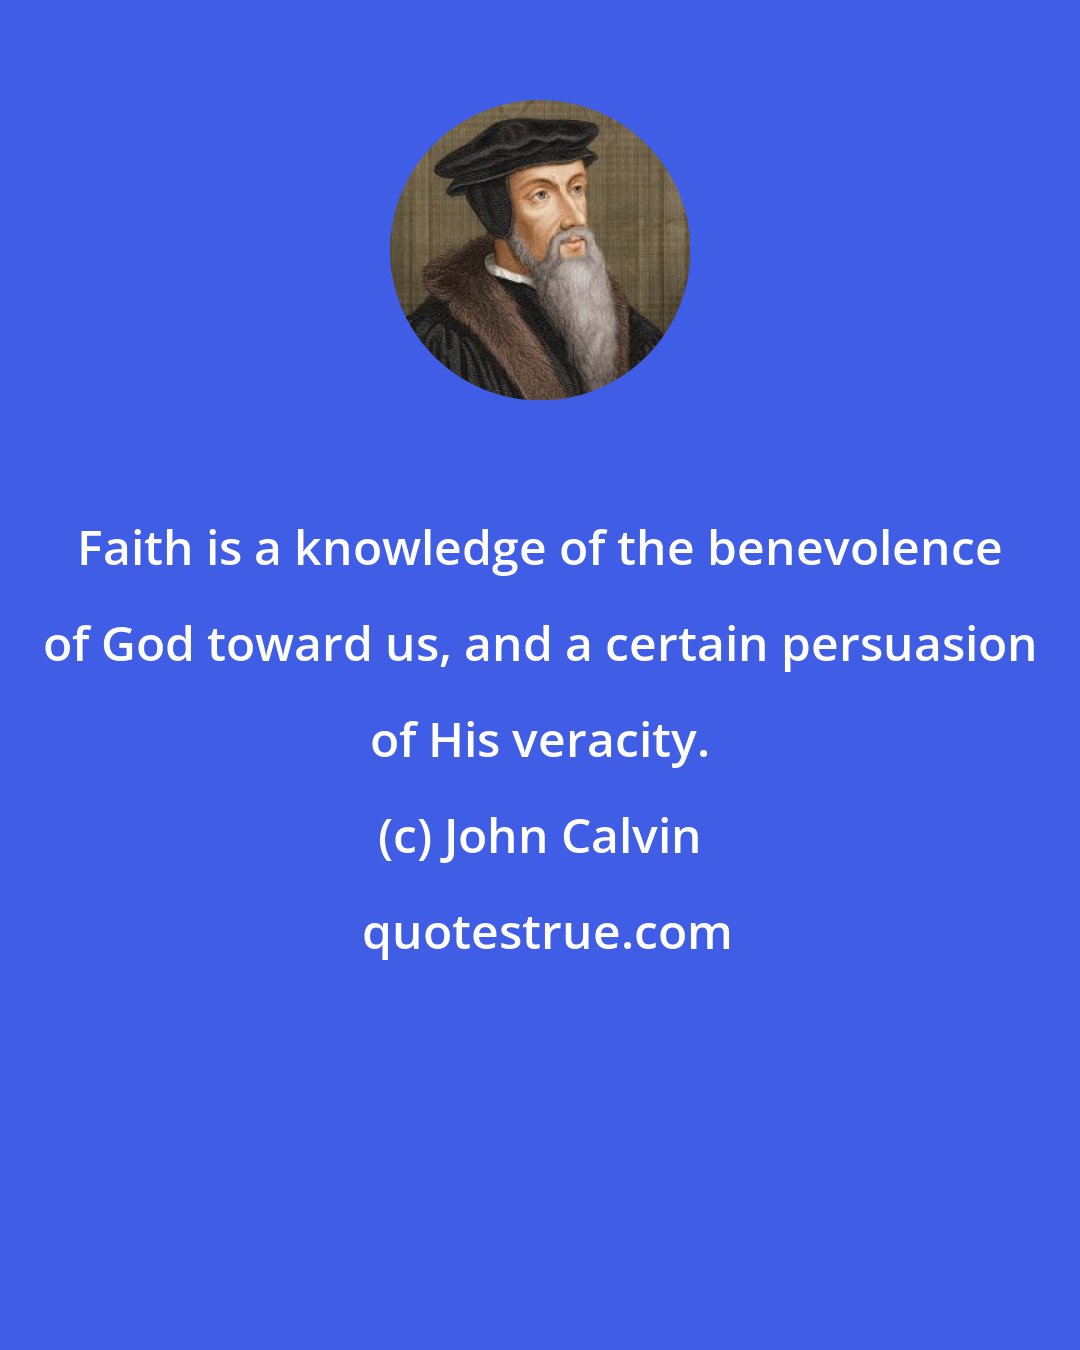 John Calvin: Faith is a knowledge of the benevolence of God toward us, and a certain persuasion of His veracity.